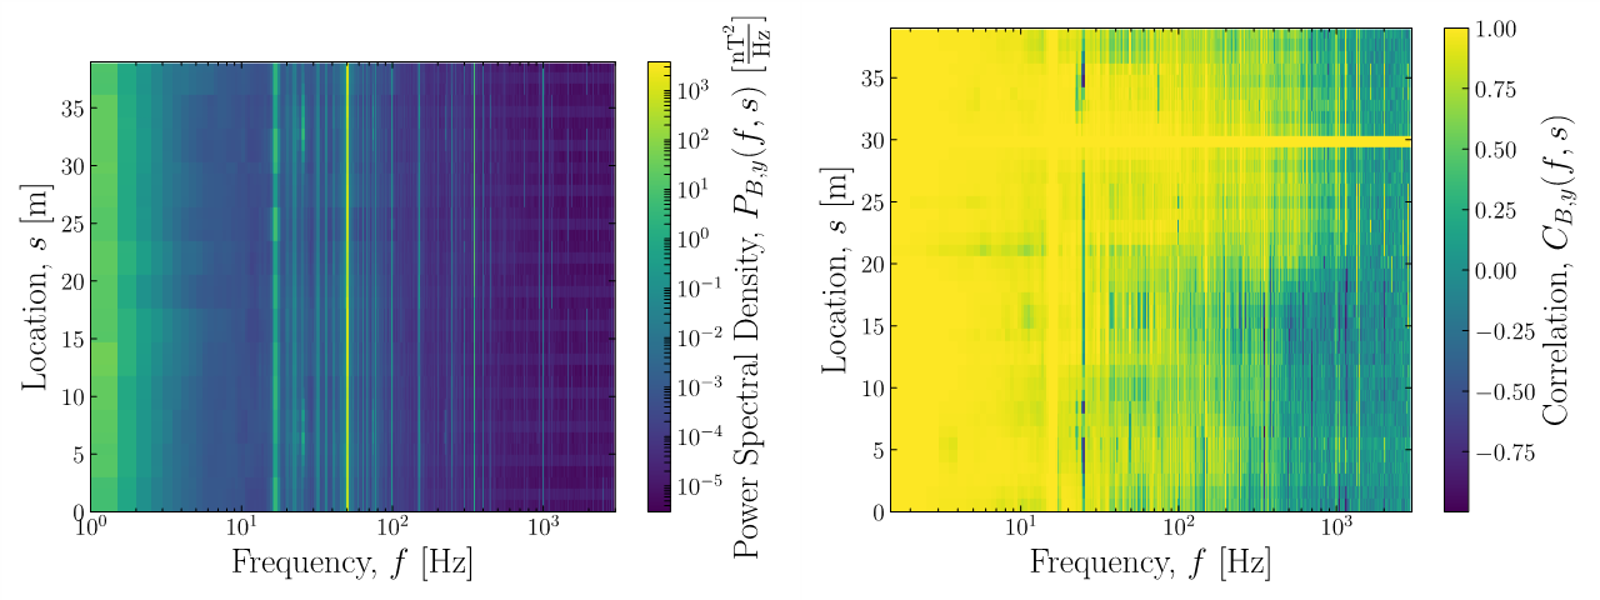 Figure 4: (Left) Power spectral density and (right) correlation with respect to s=30 m of the magnetic fields measured at point 5 of the Large Hadron Collider.